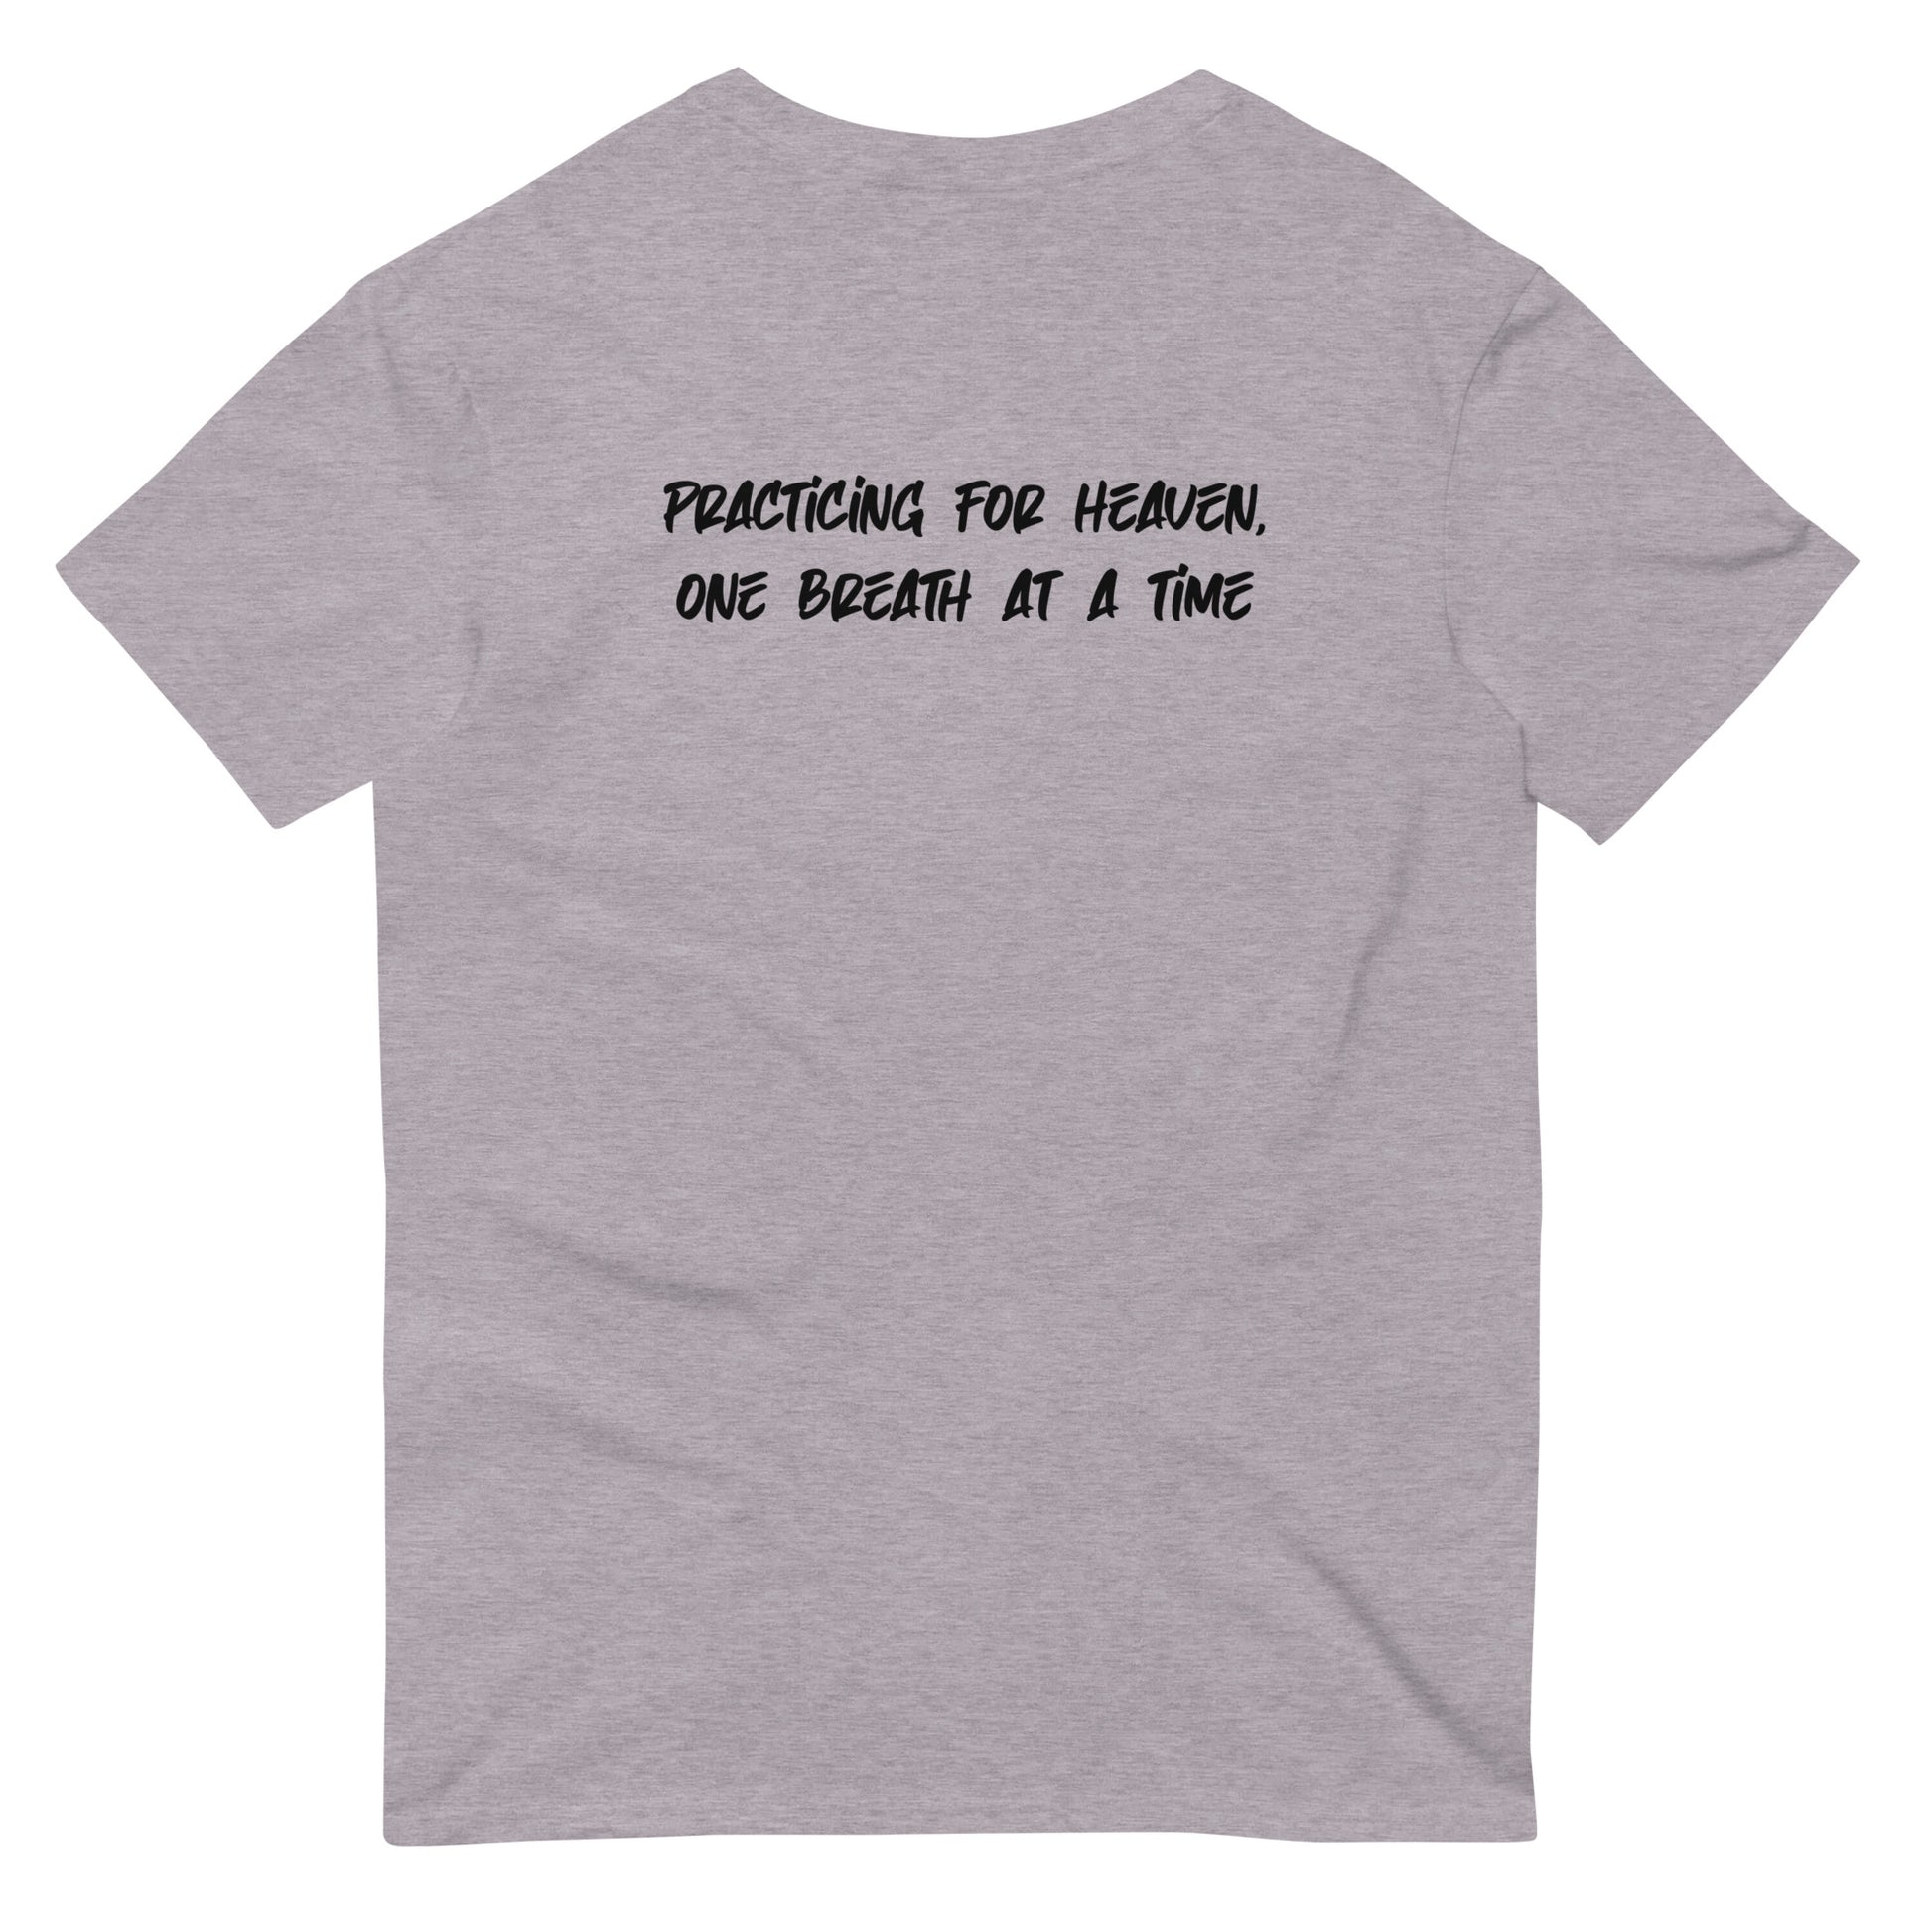 Tribe of Weirdos' 'Practicing For Heaven, One Breath At A Time' T-Shirt, a wearable reminder of life's journey towards tranquility.